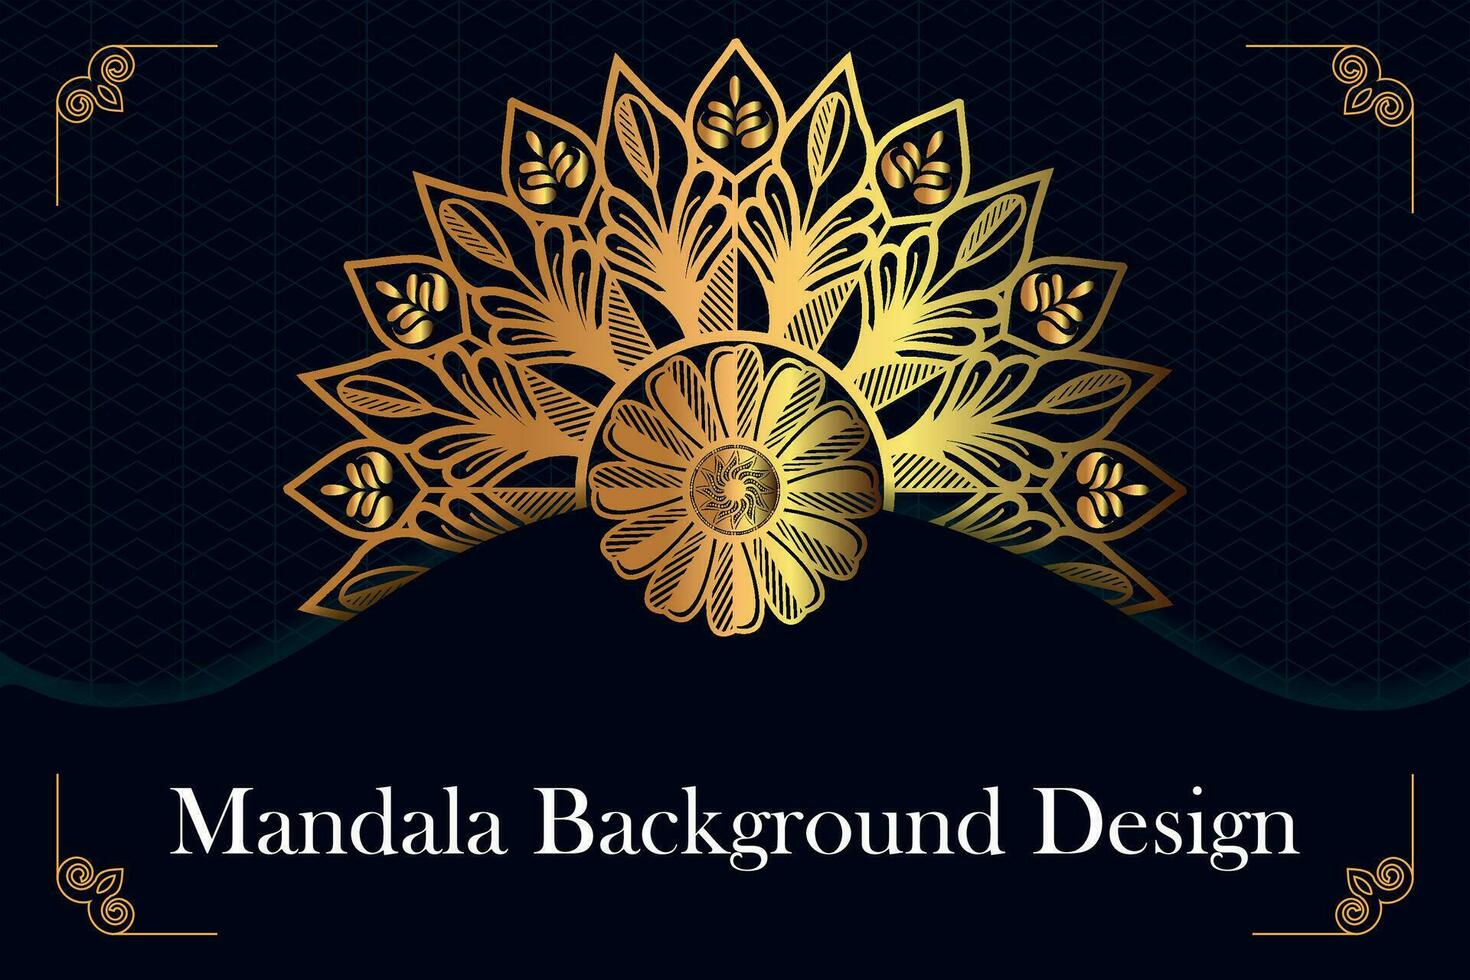 Creative, Modern, Abstract and Professional Coloring Luxury Ornamental Mandala Background Design or Pattern Design Vector